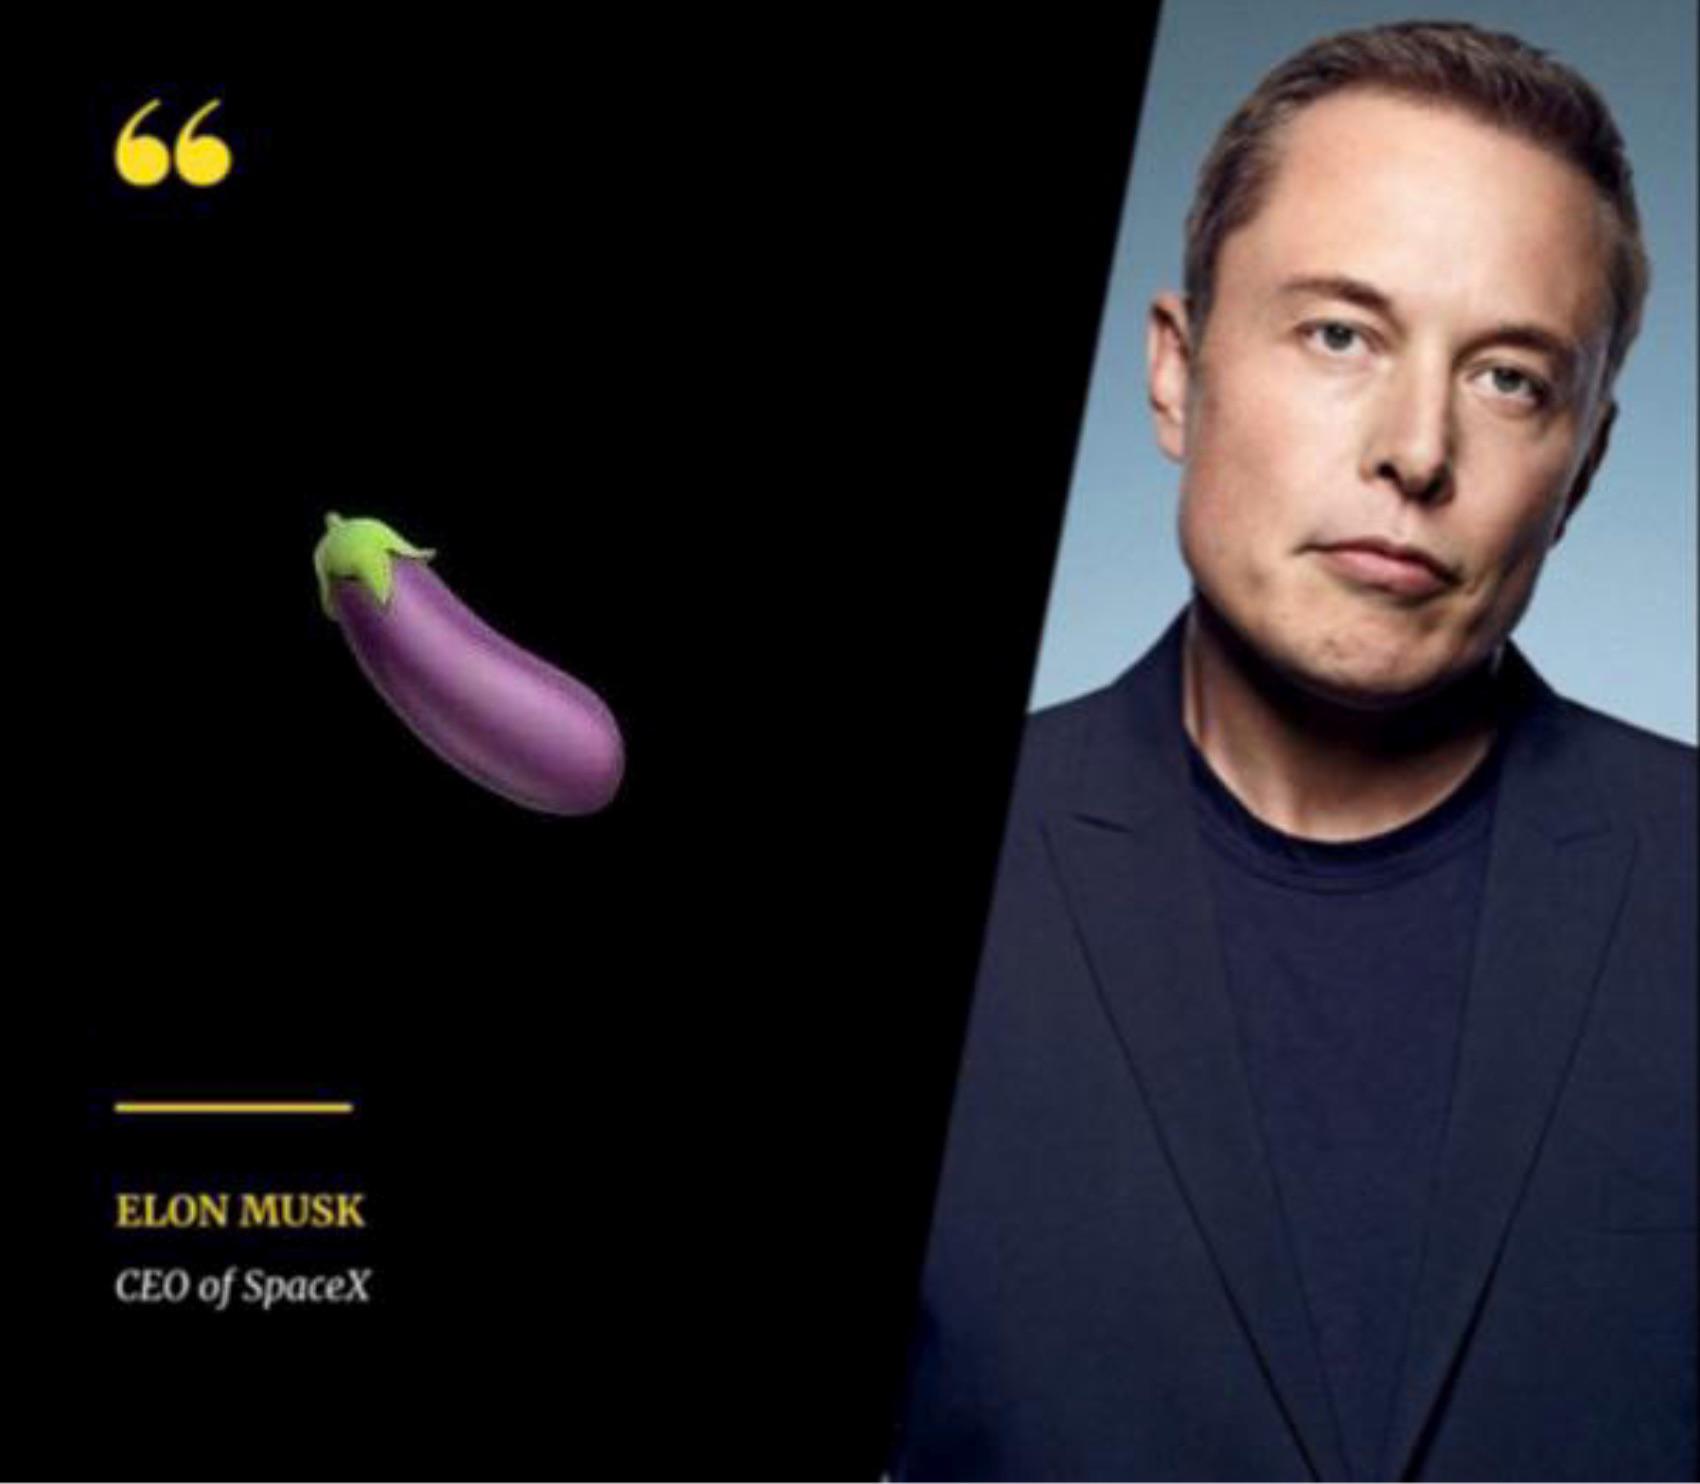 66 Elon Musk Ceo of SpaceX